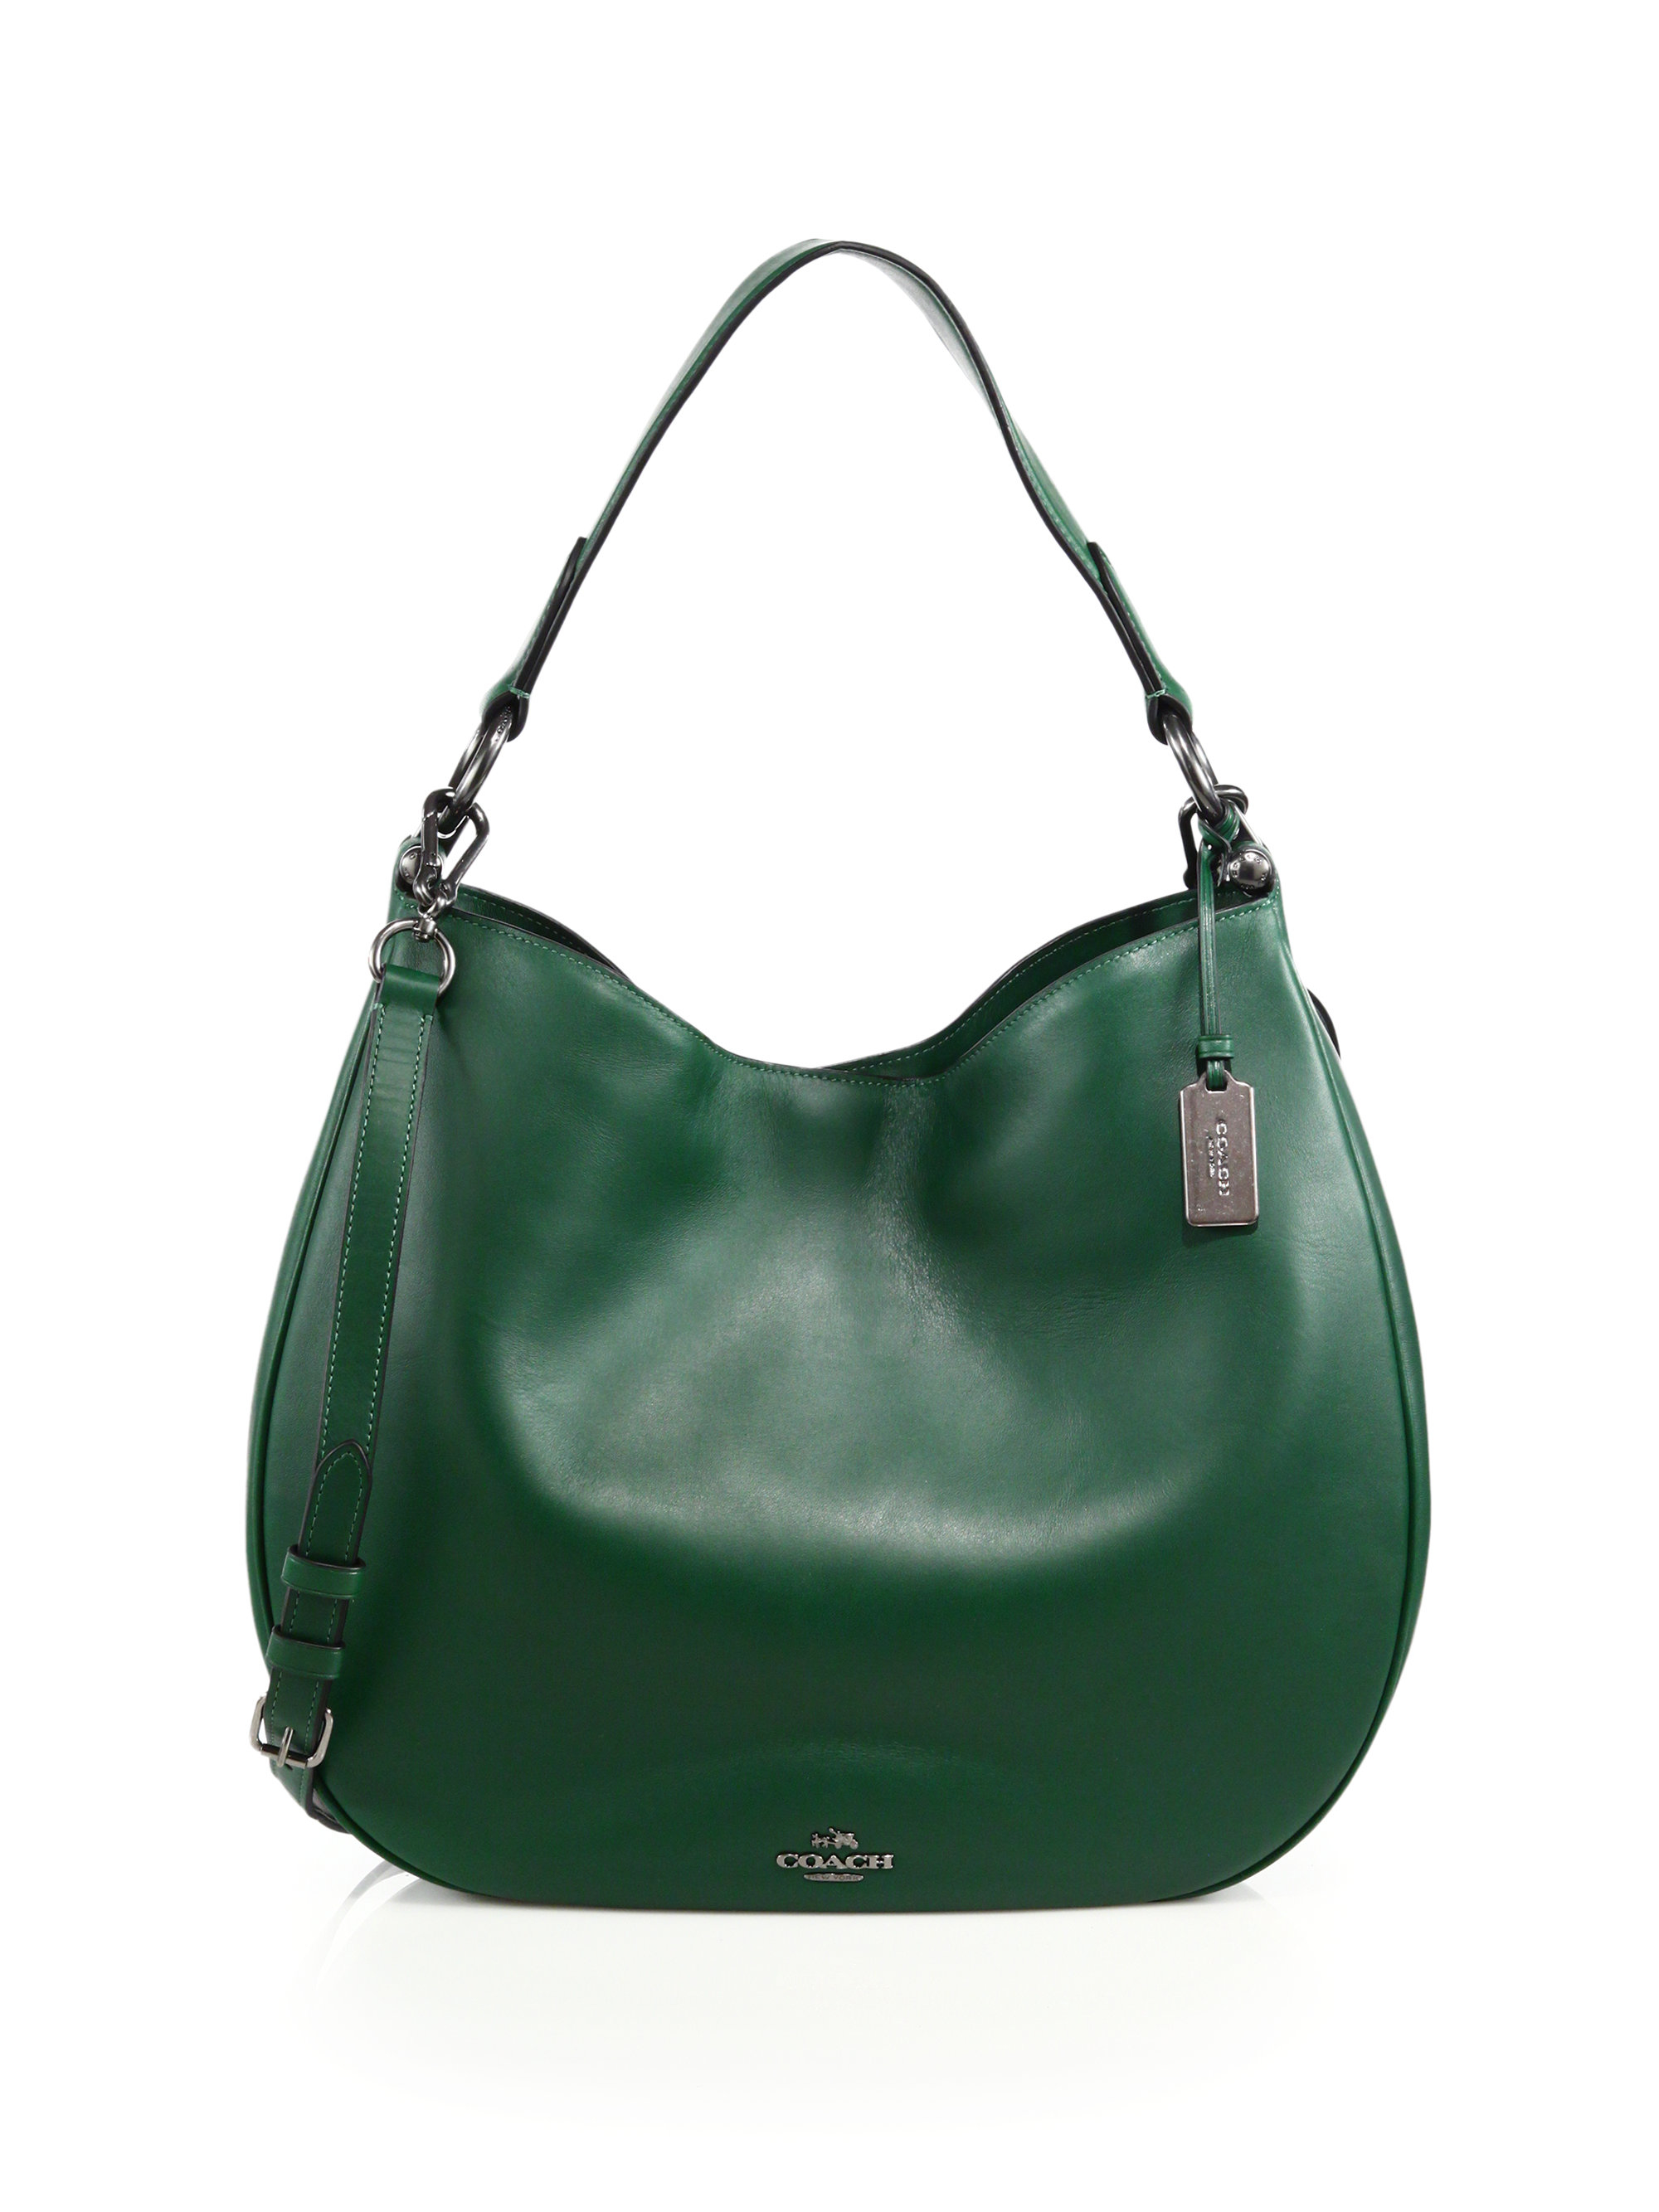 Coach Pebbled Leather Pouch Silver Tone Shoulder Bag - Green